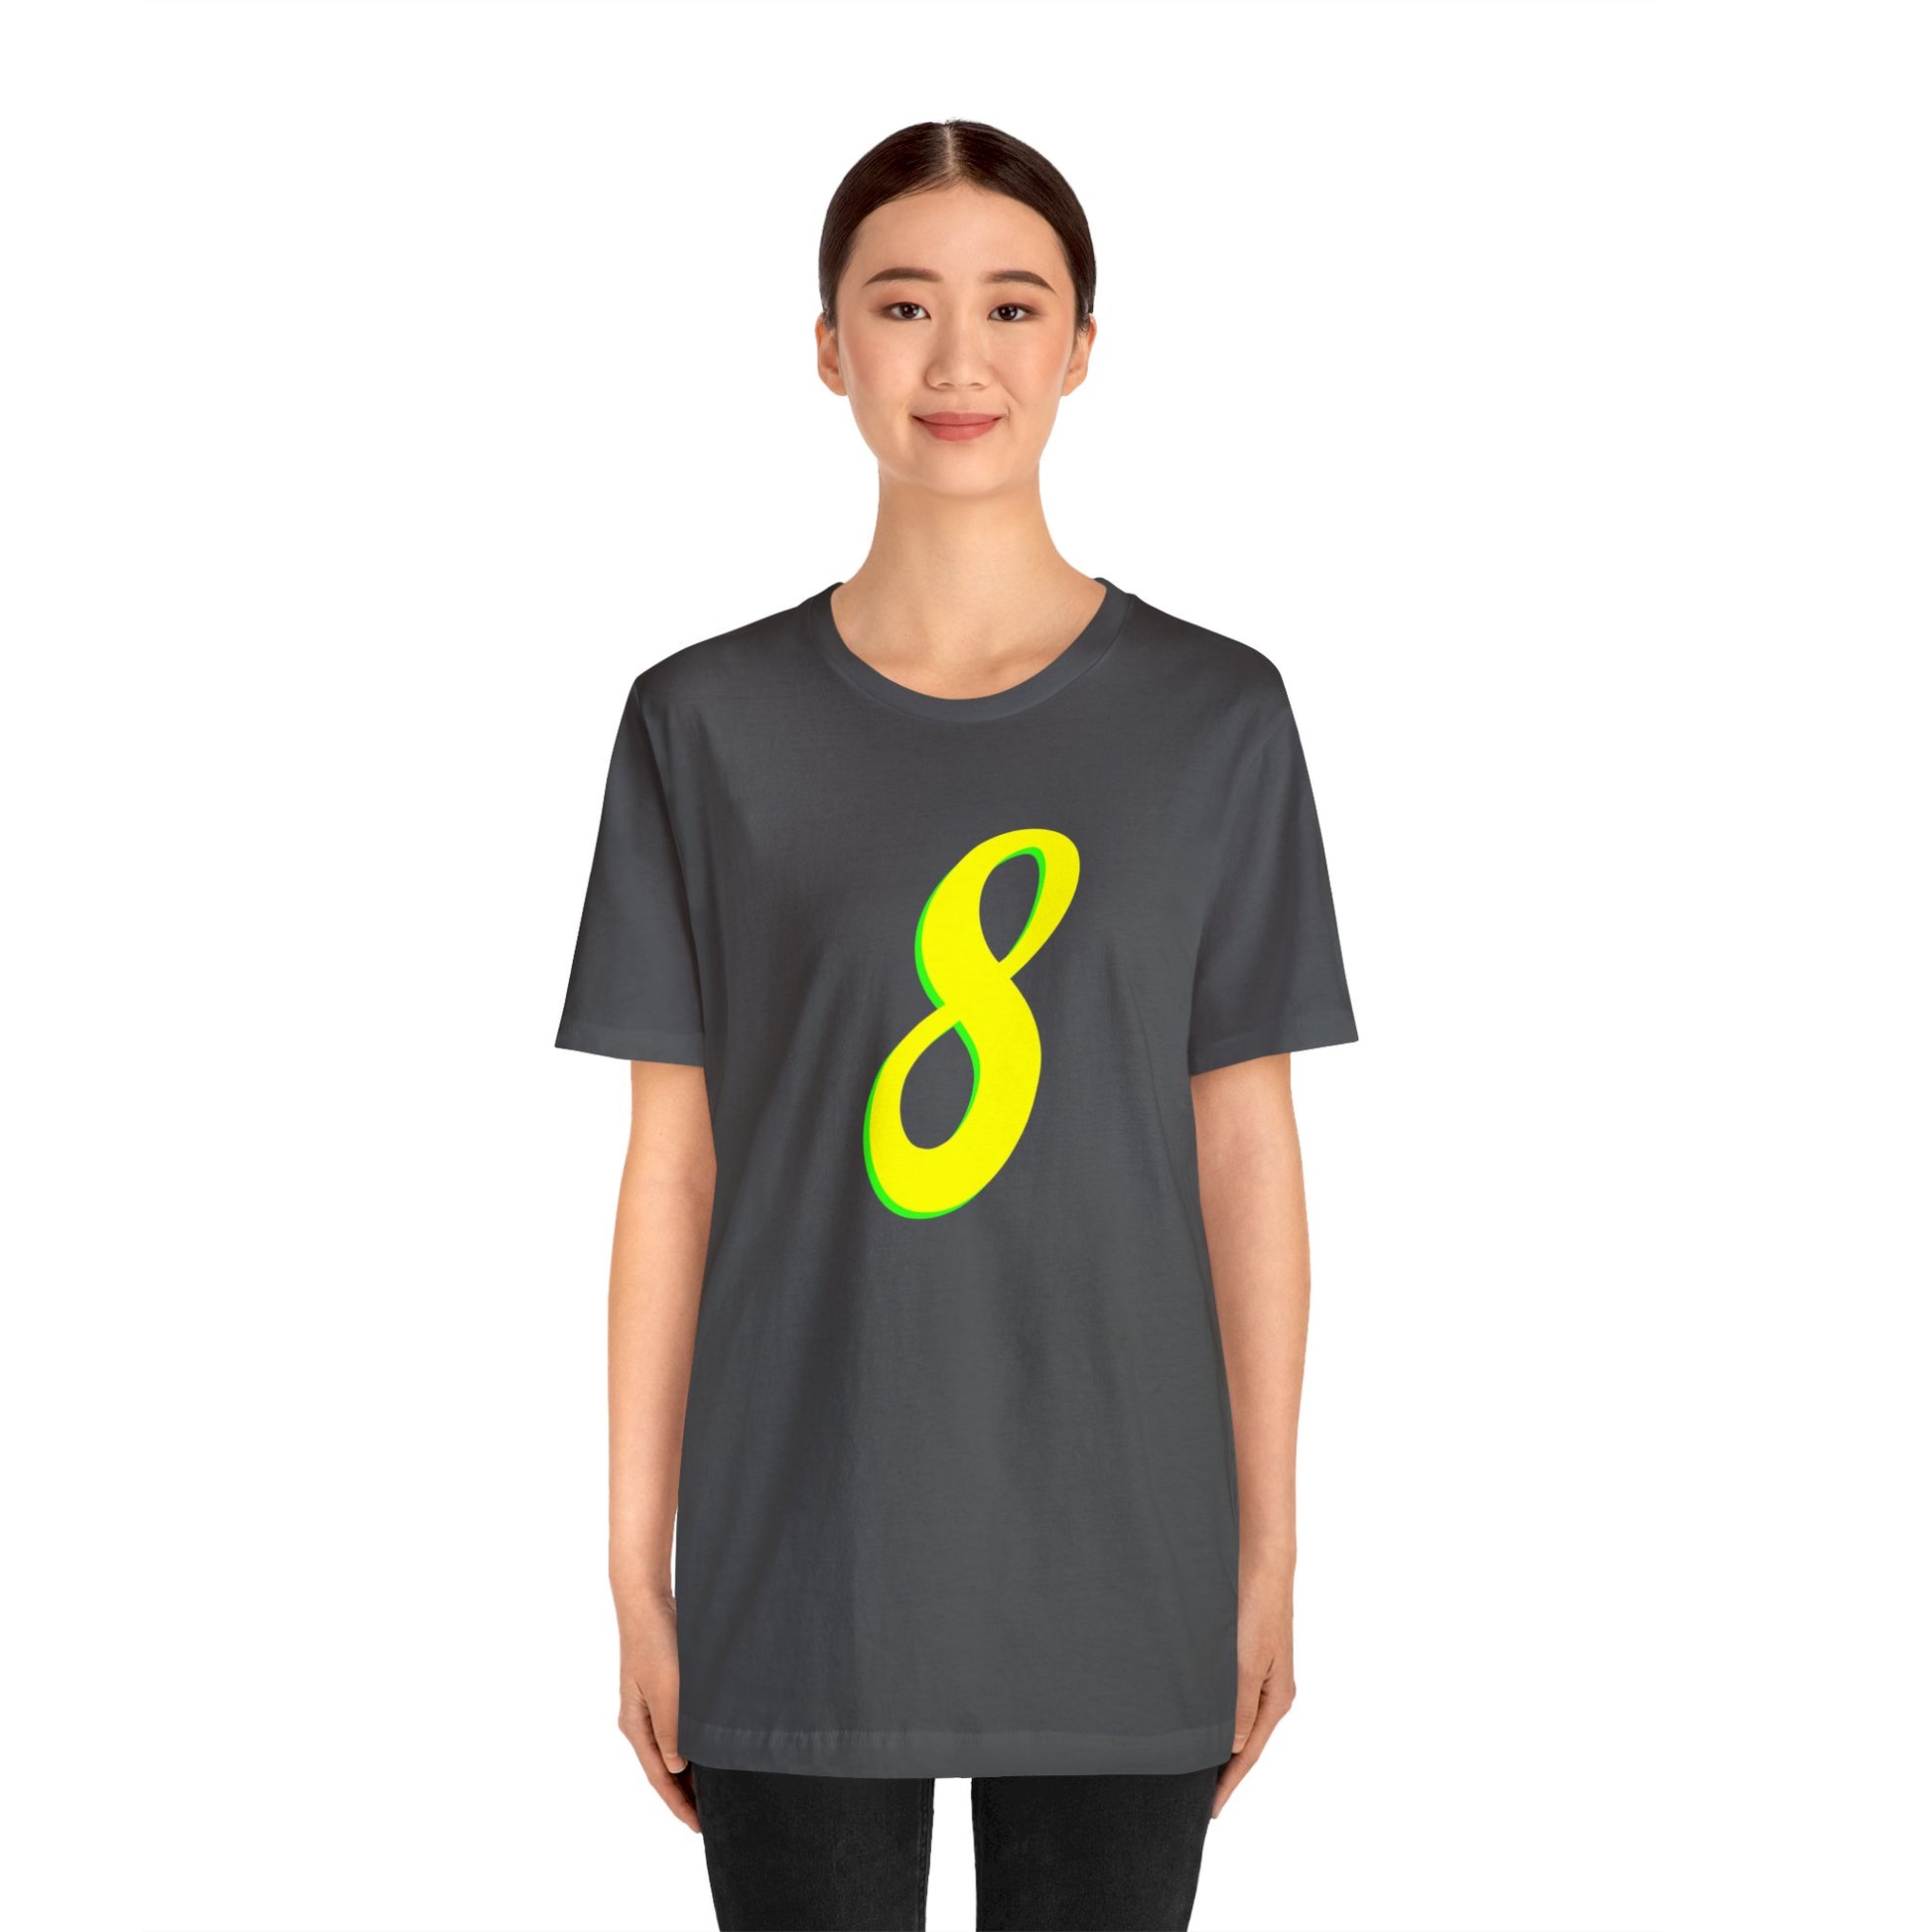 Number 8 Design - Soft Cotton Tee for birthdays and celebrations, Gift for friends and family, Multiple Options by clothezy.com in Black Size Medium - Buy Now